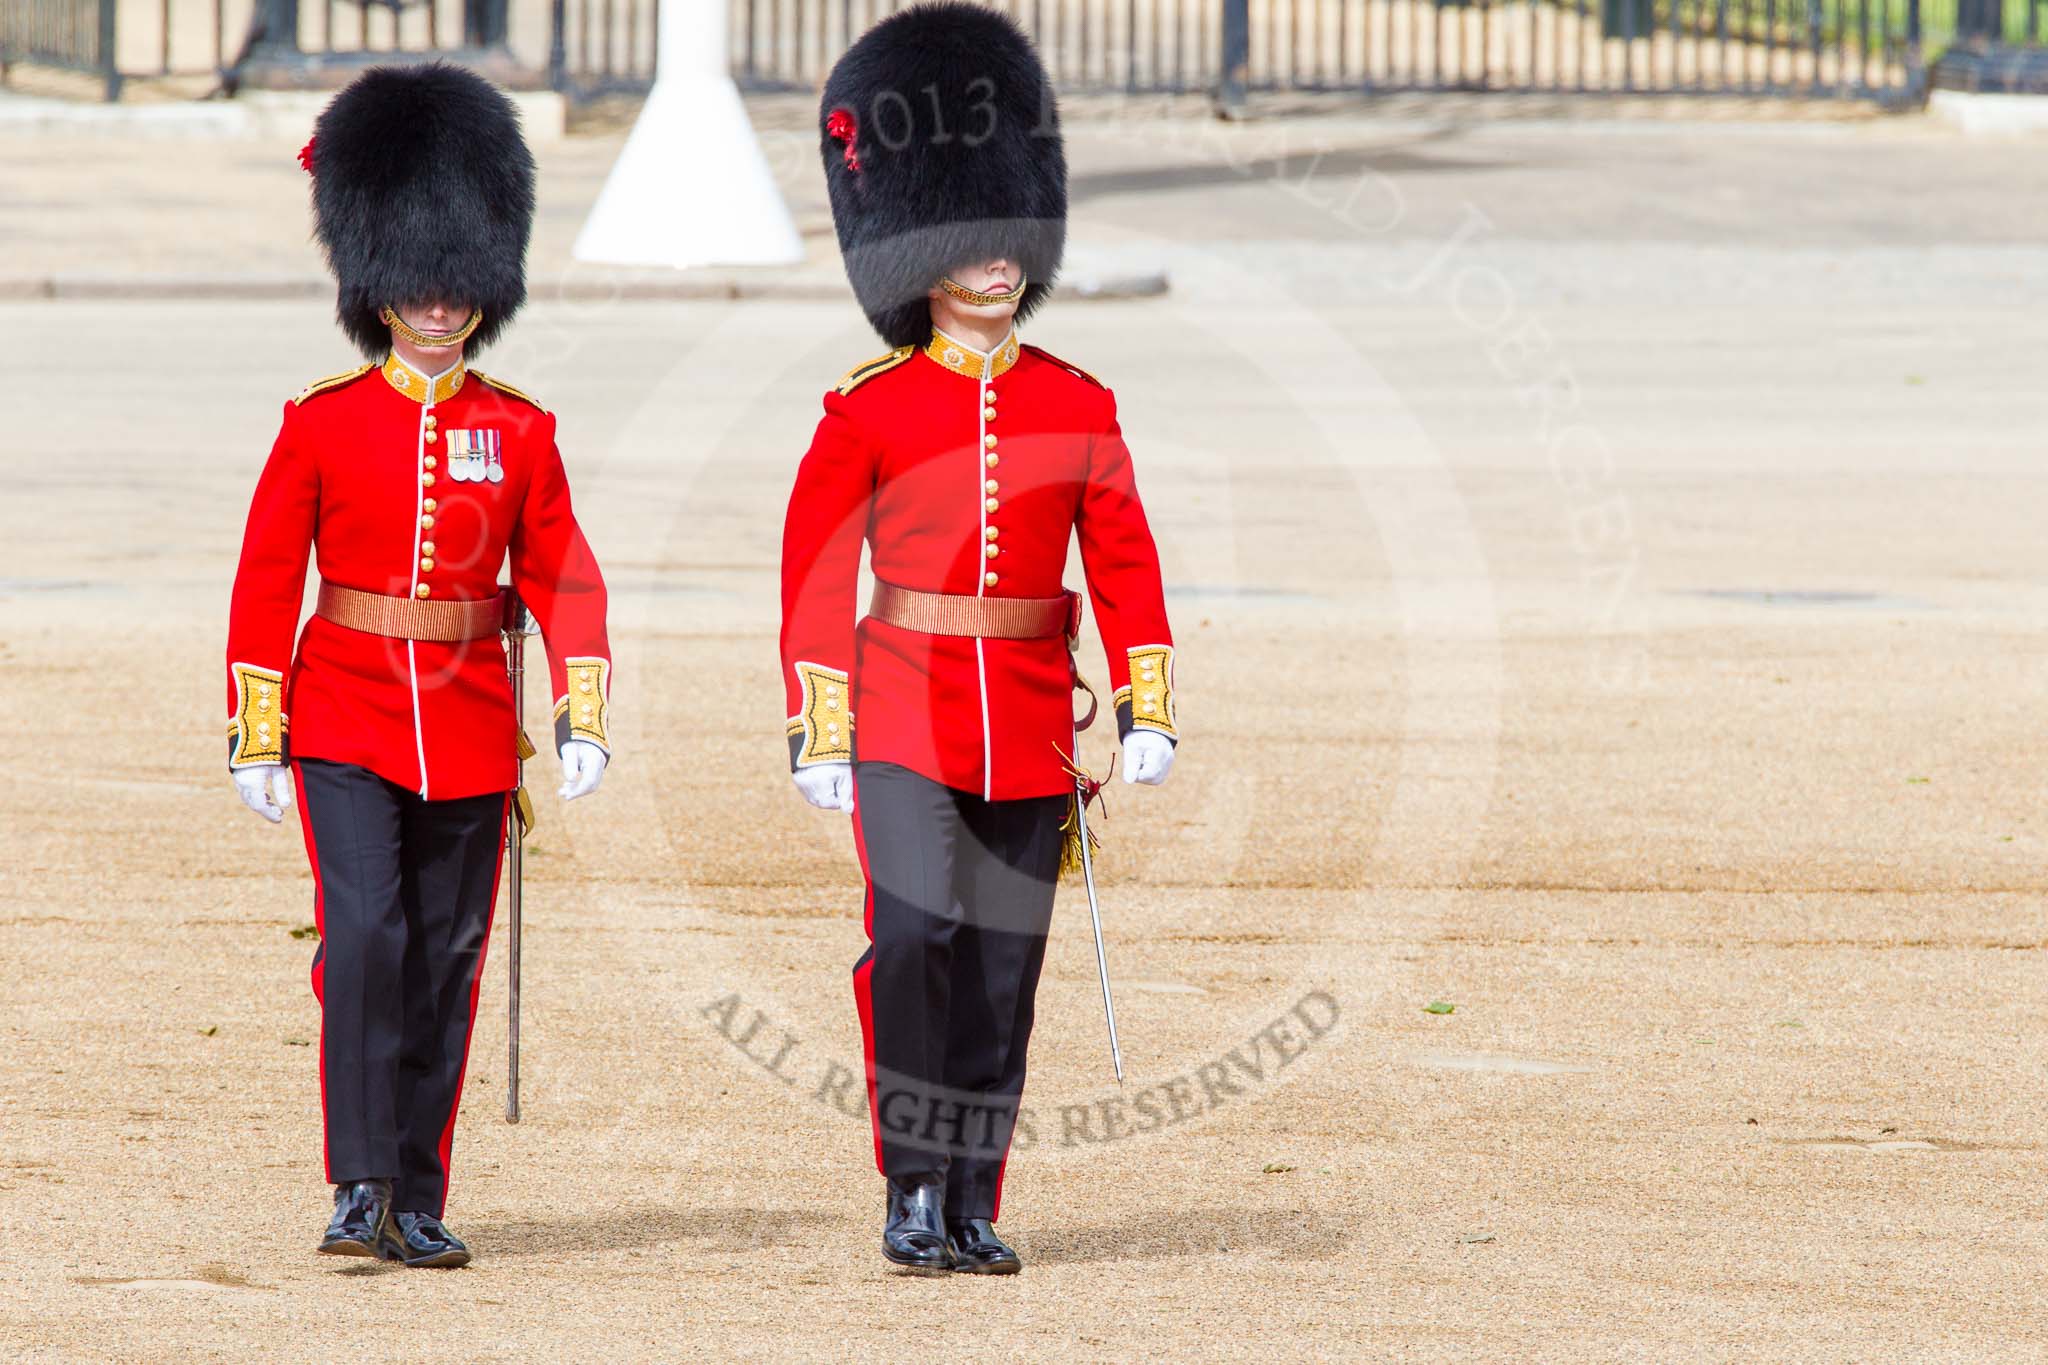 Trooping the Colour 2013: Major T P Y Radcliffe and Second Lieutenant J C Olley, No. 6 Guard, No. 7 Company Coldstream Guards, following the Keepers of the Ground to Horse Guards Arch. Image #33, 15 June 2013 09:57 Horse Guards Parade, London, UK